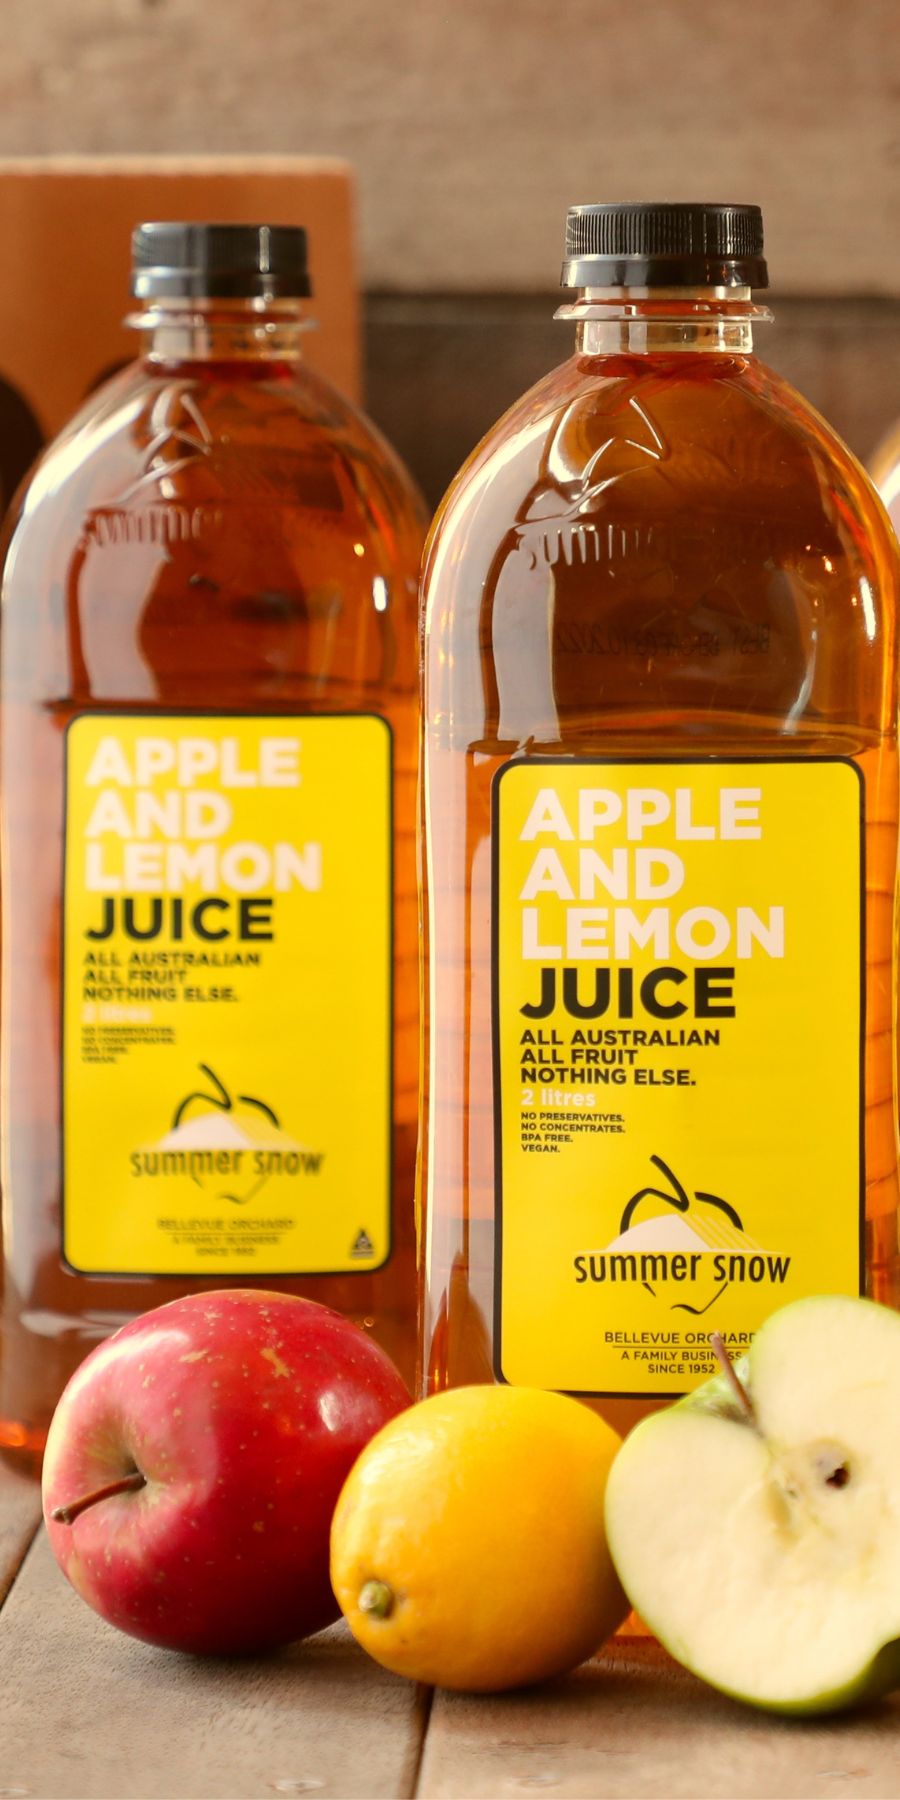 Summer Snow Juice Subscribe & Save Limited Offer